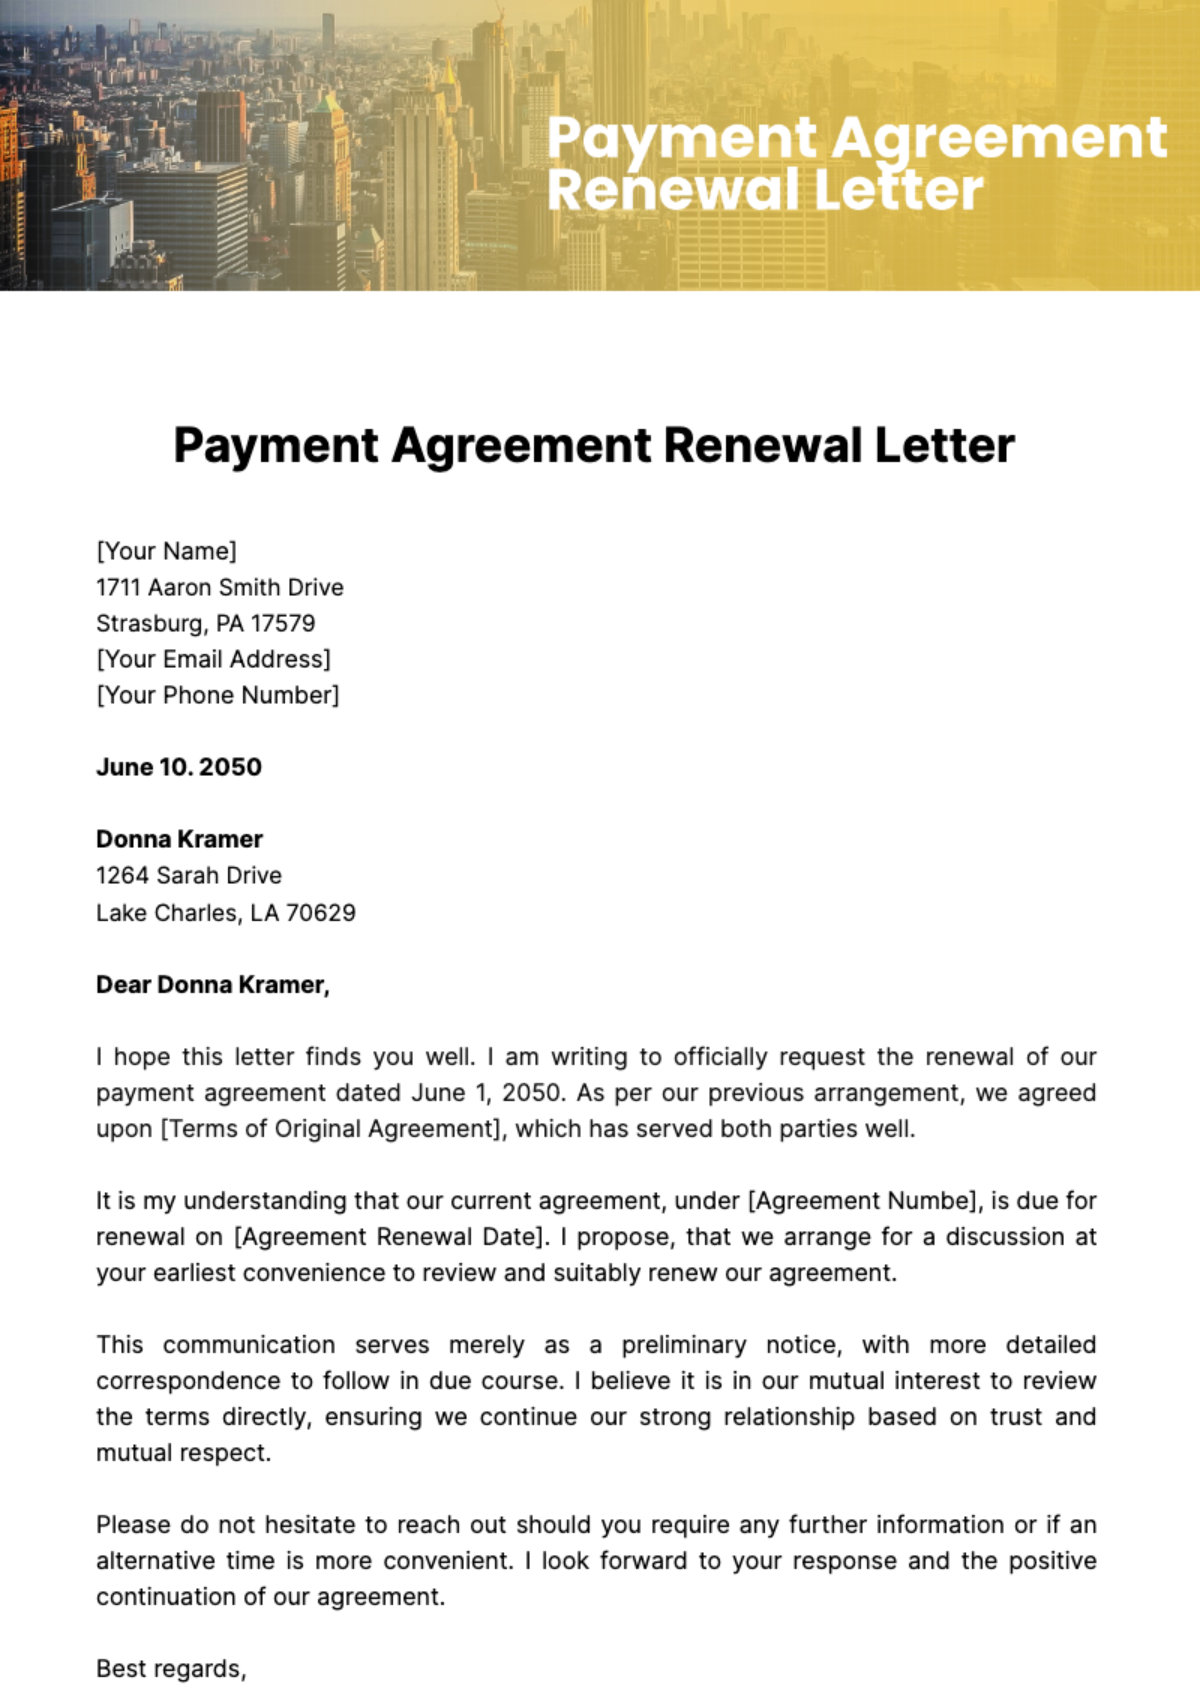 Payment Agreement Renewal Letter Template